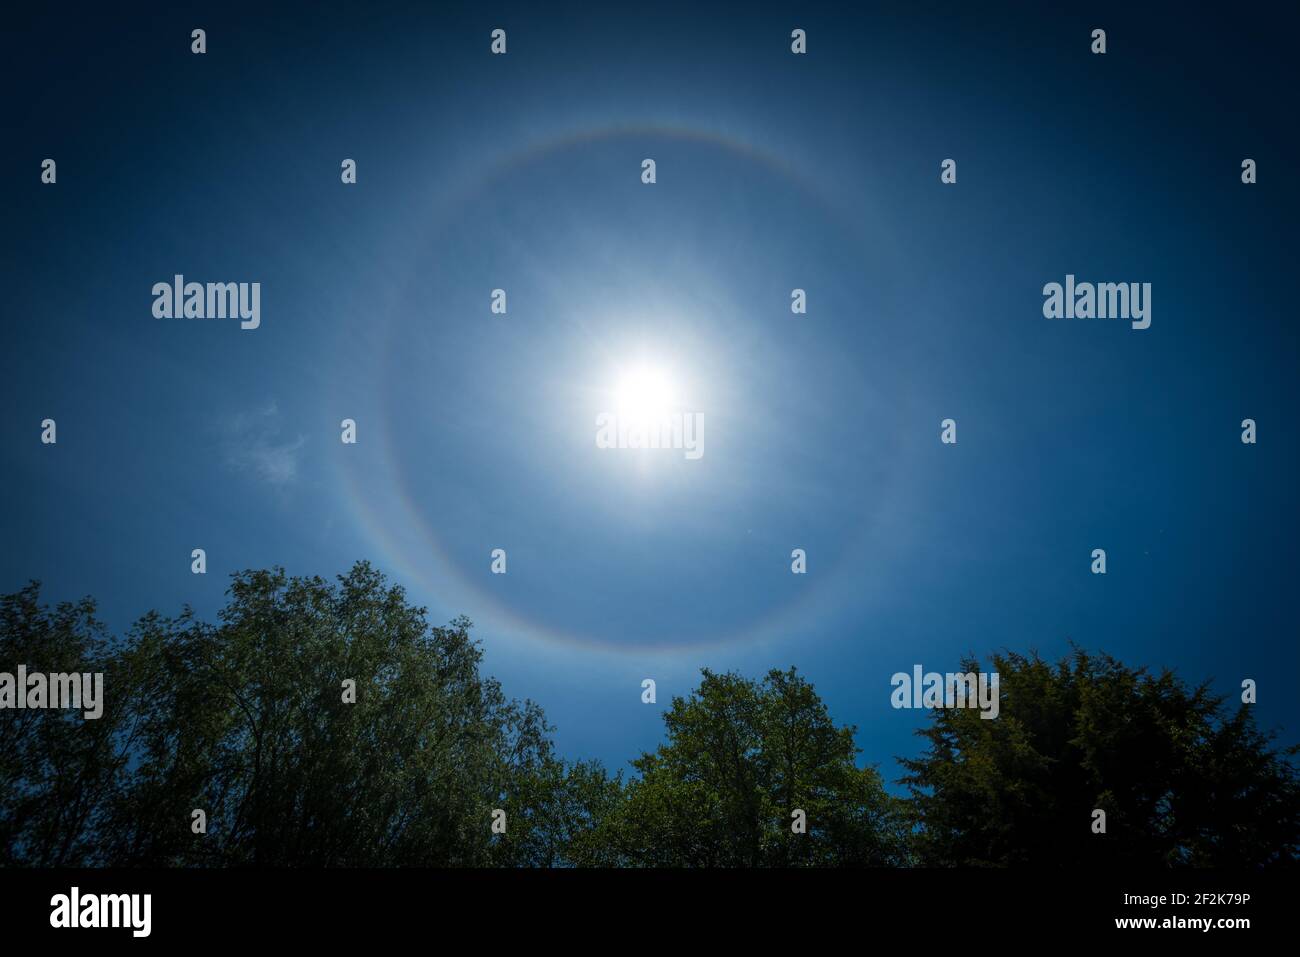 A 22 degree halo around the sun as seen from Exeter, Devon, UK. Stock Photo